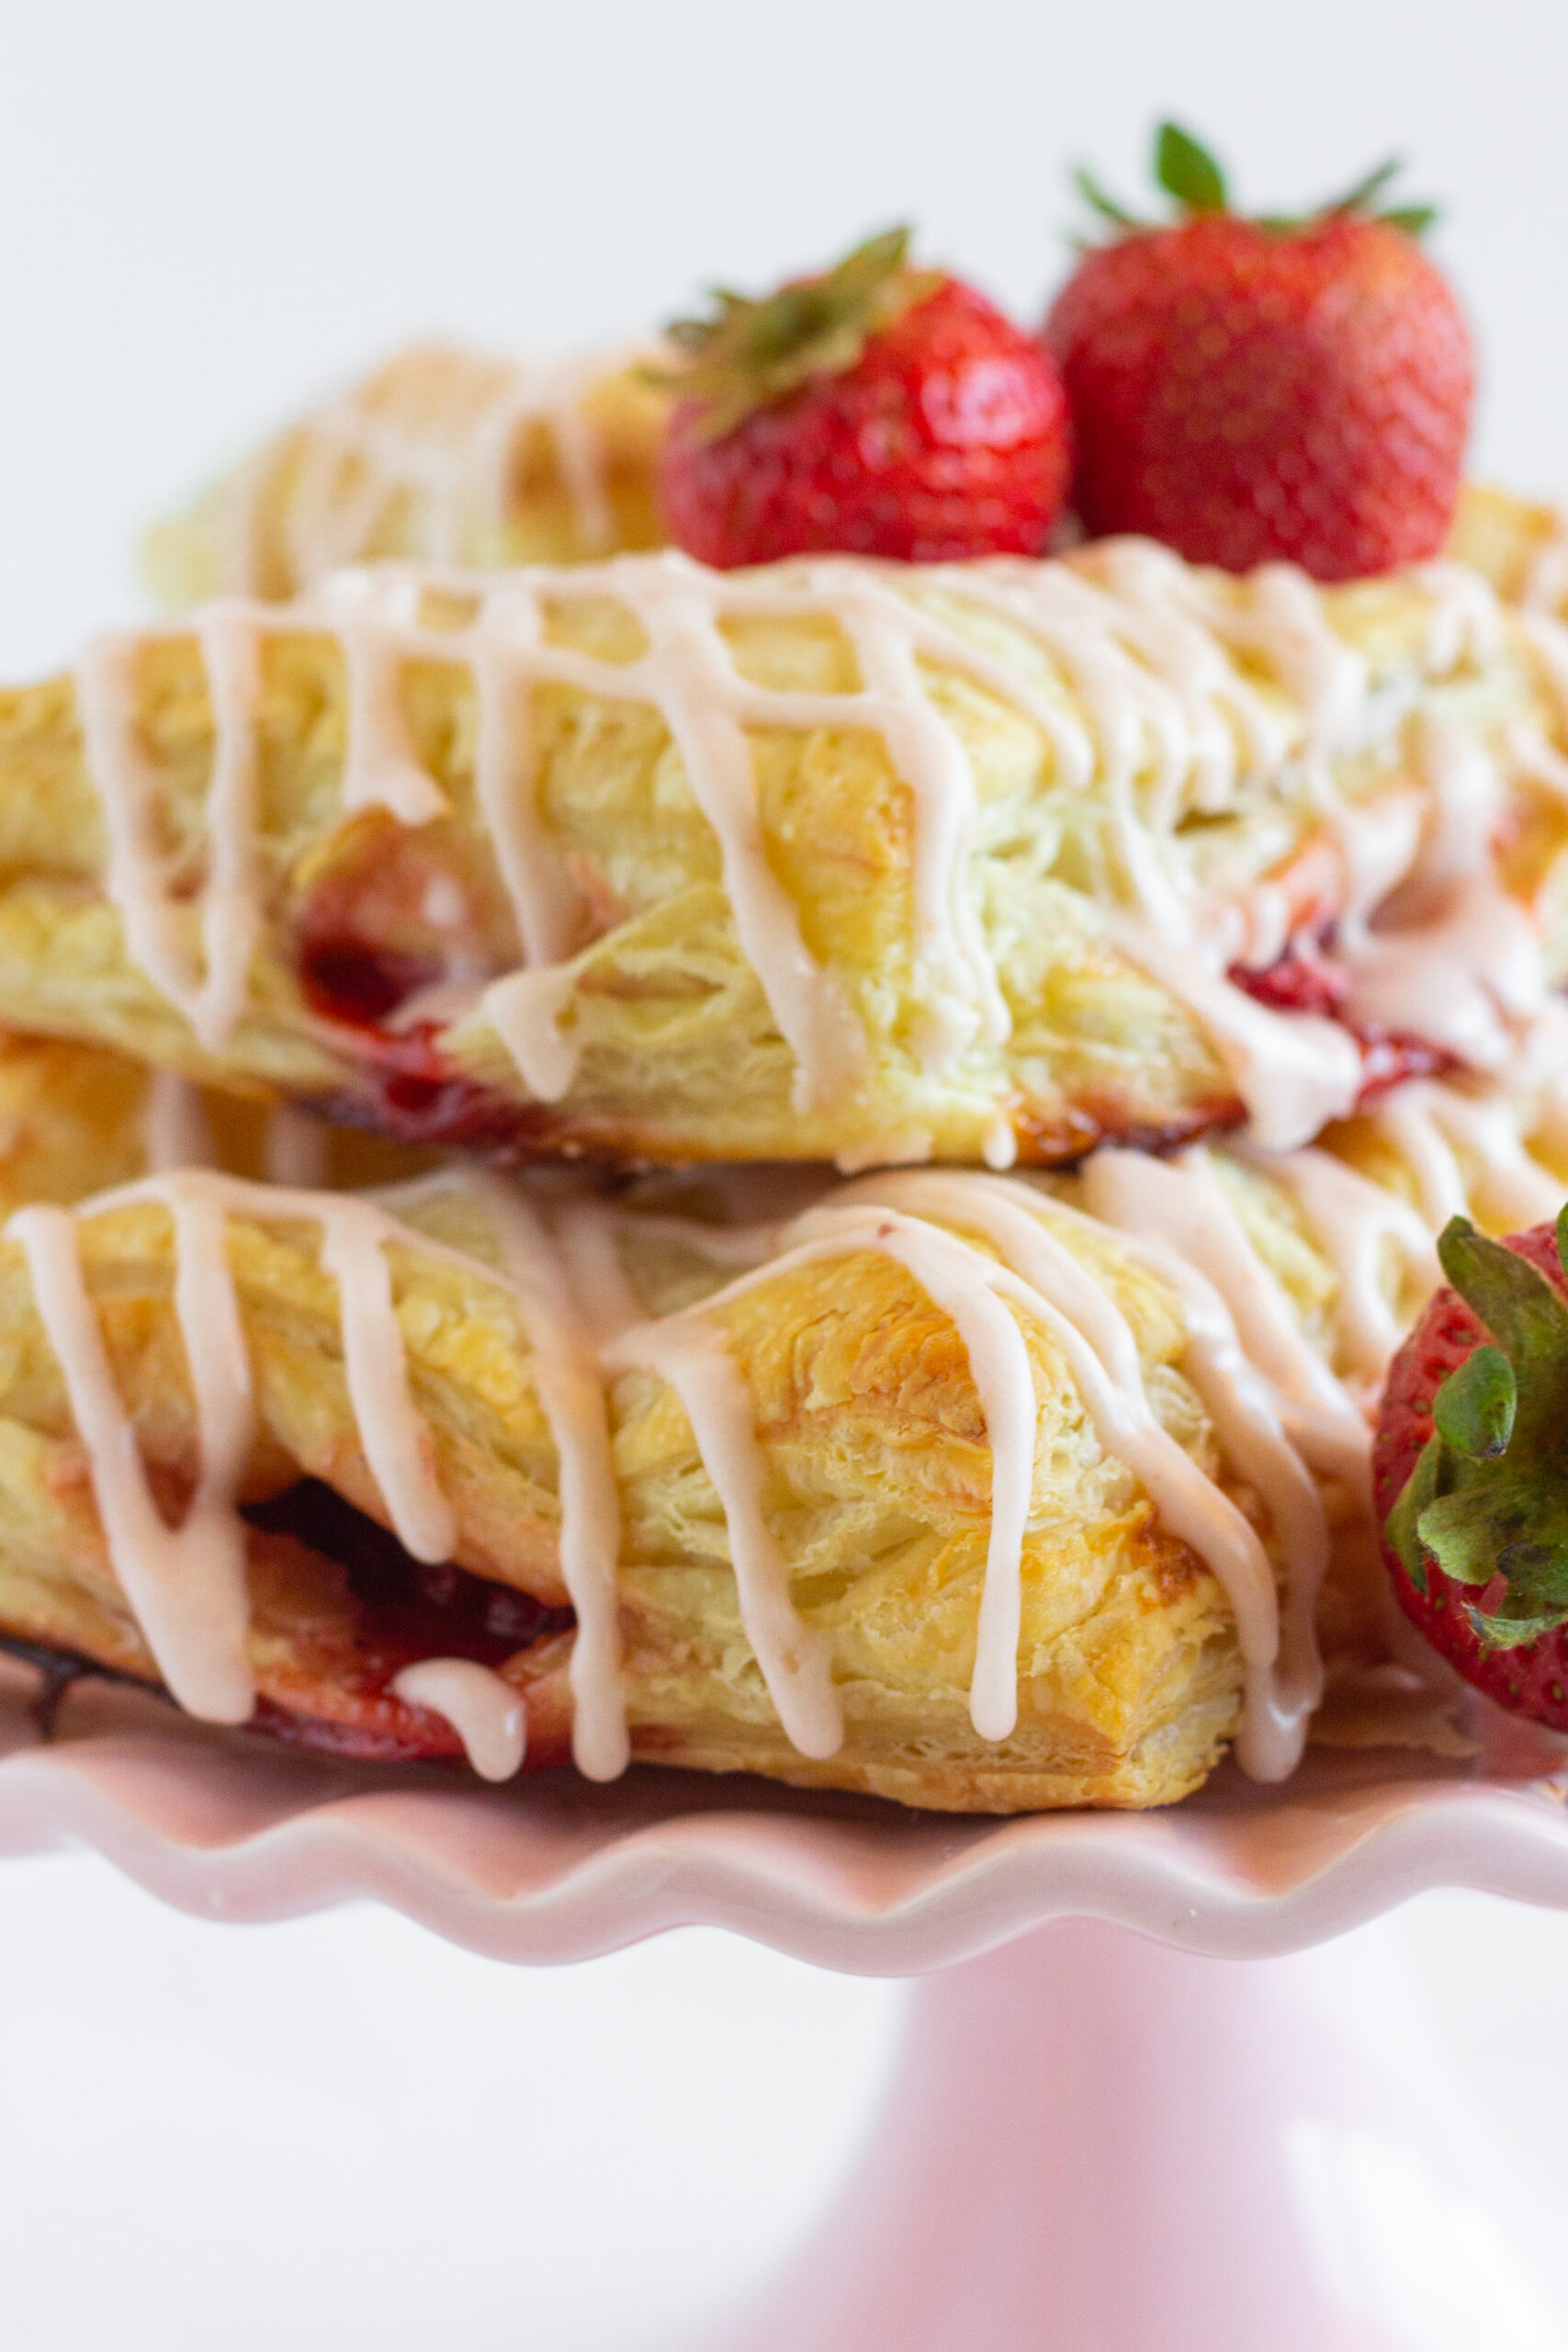 Easy Strawberry Turnovers Recipe, by Top US dessert blog Practically Homemade